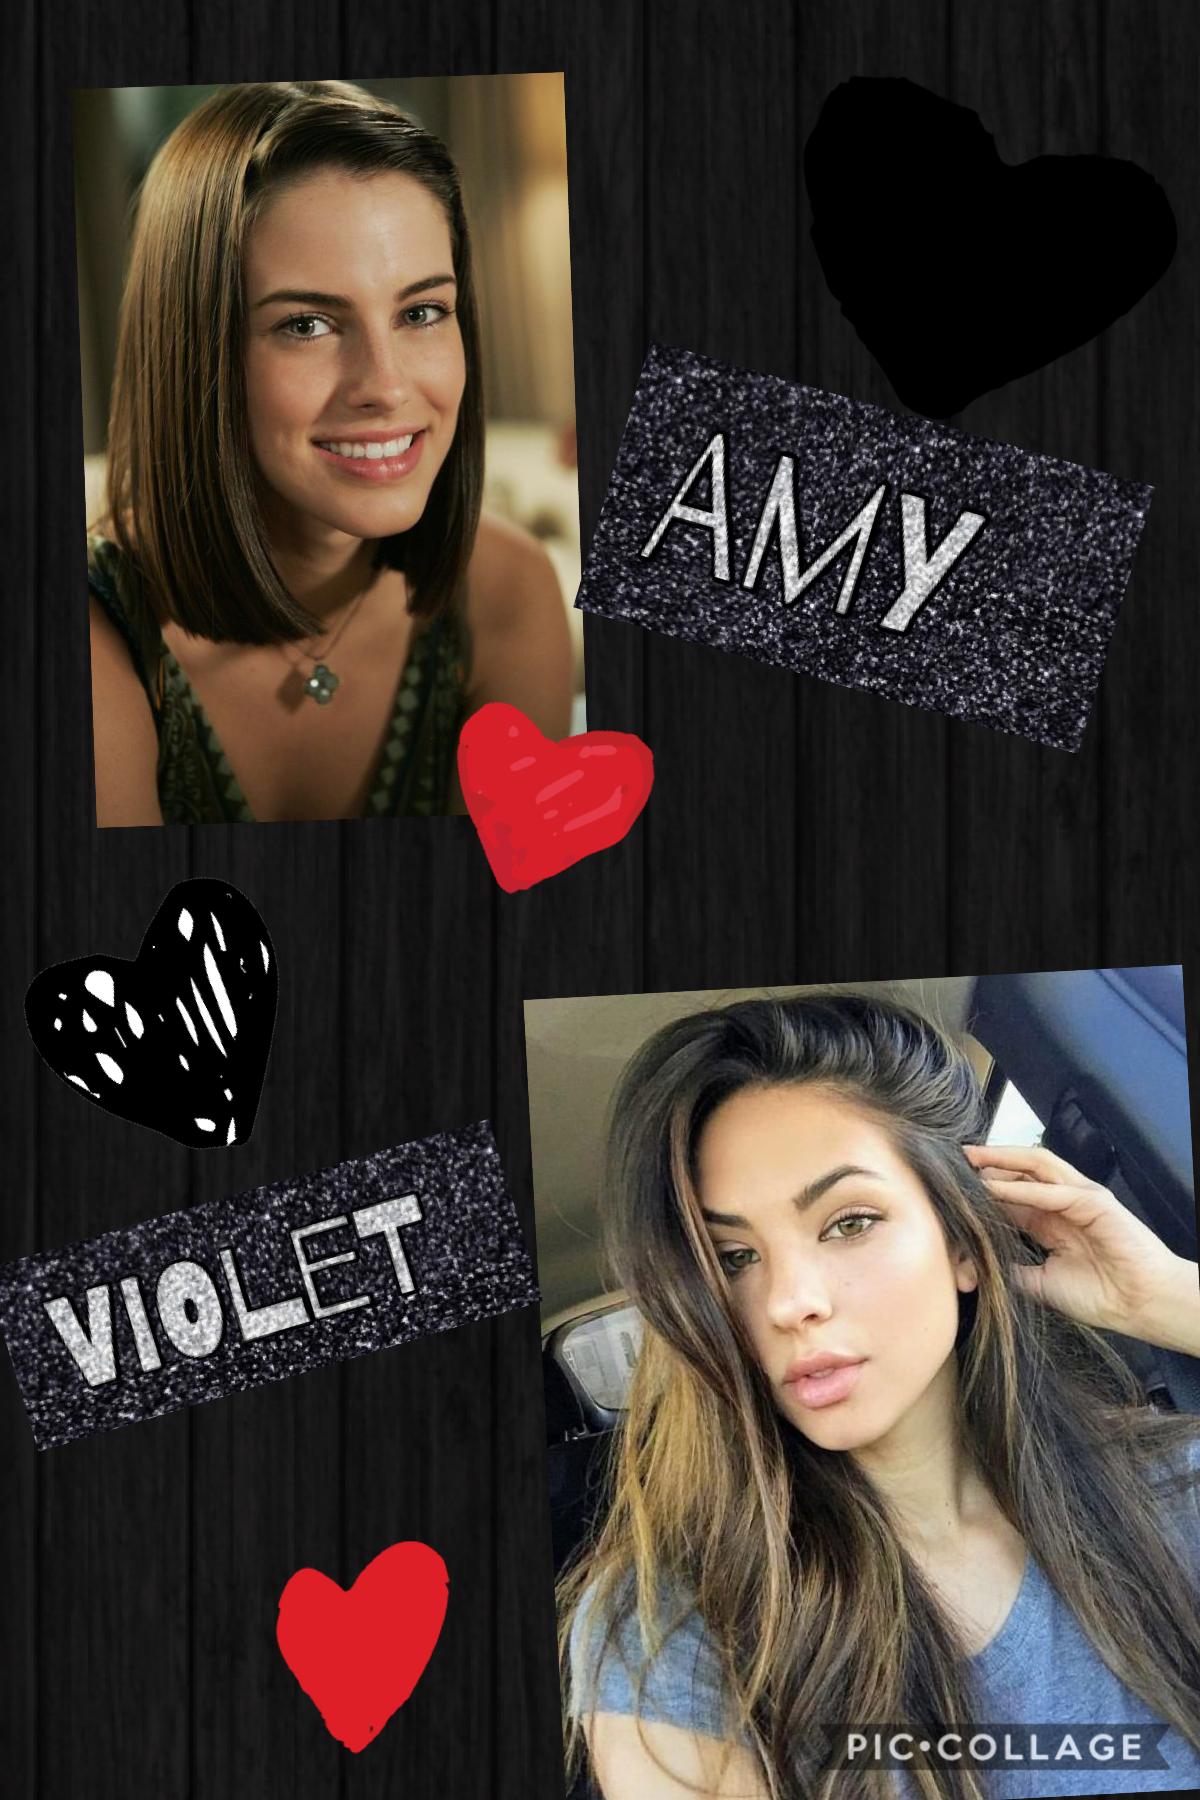 My bffs Amy and Violet